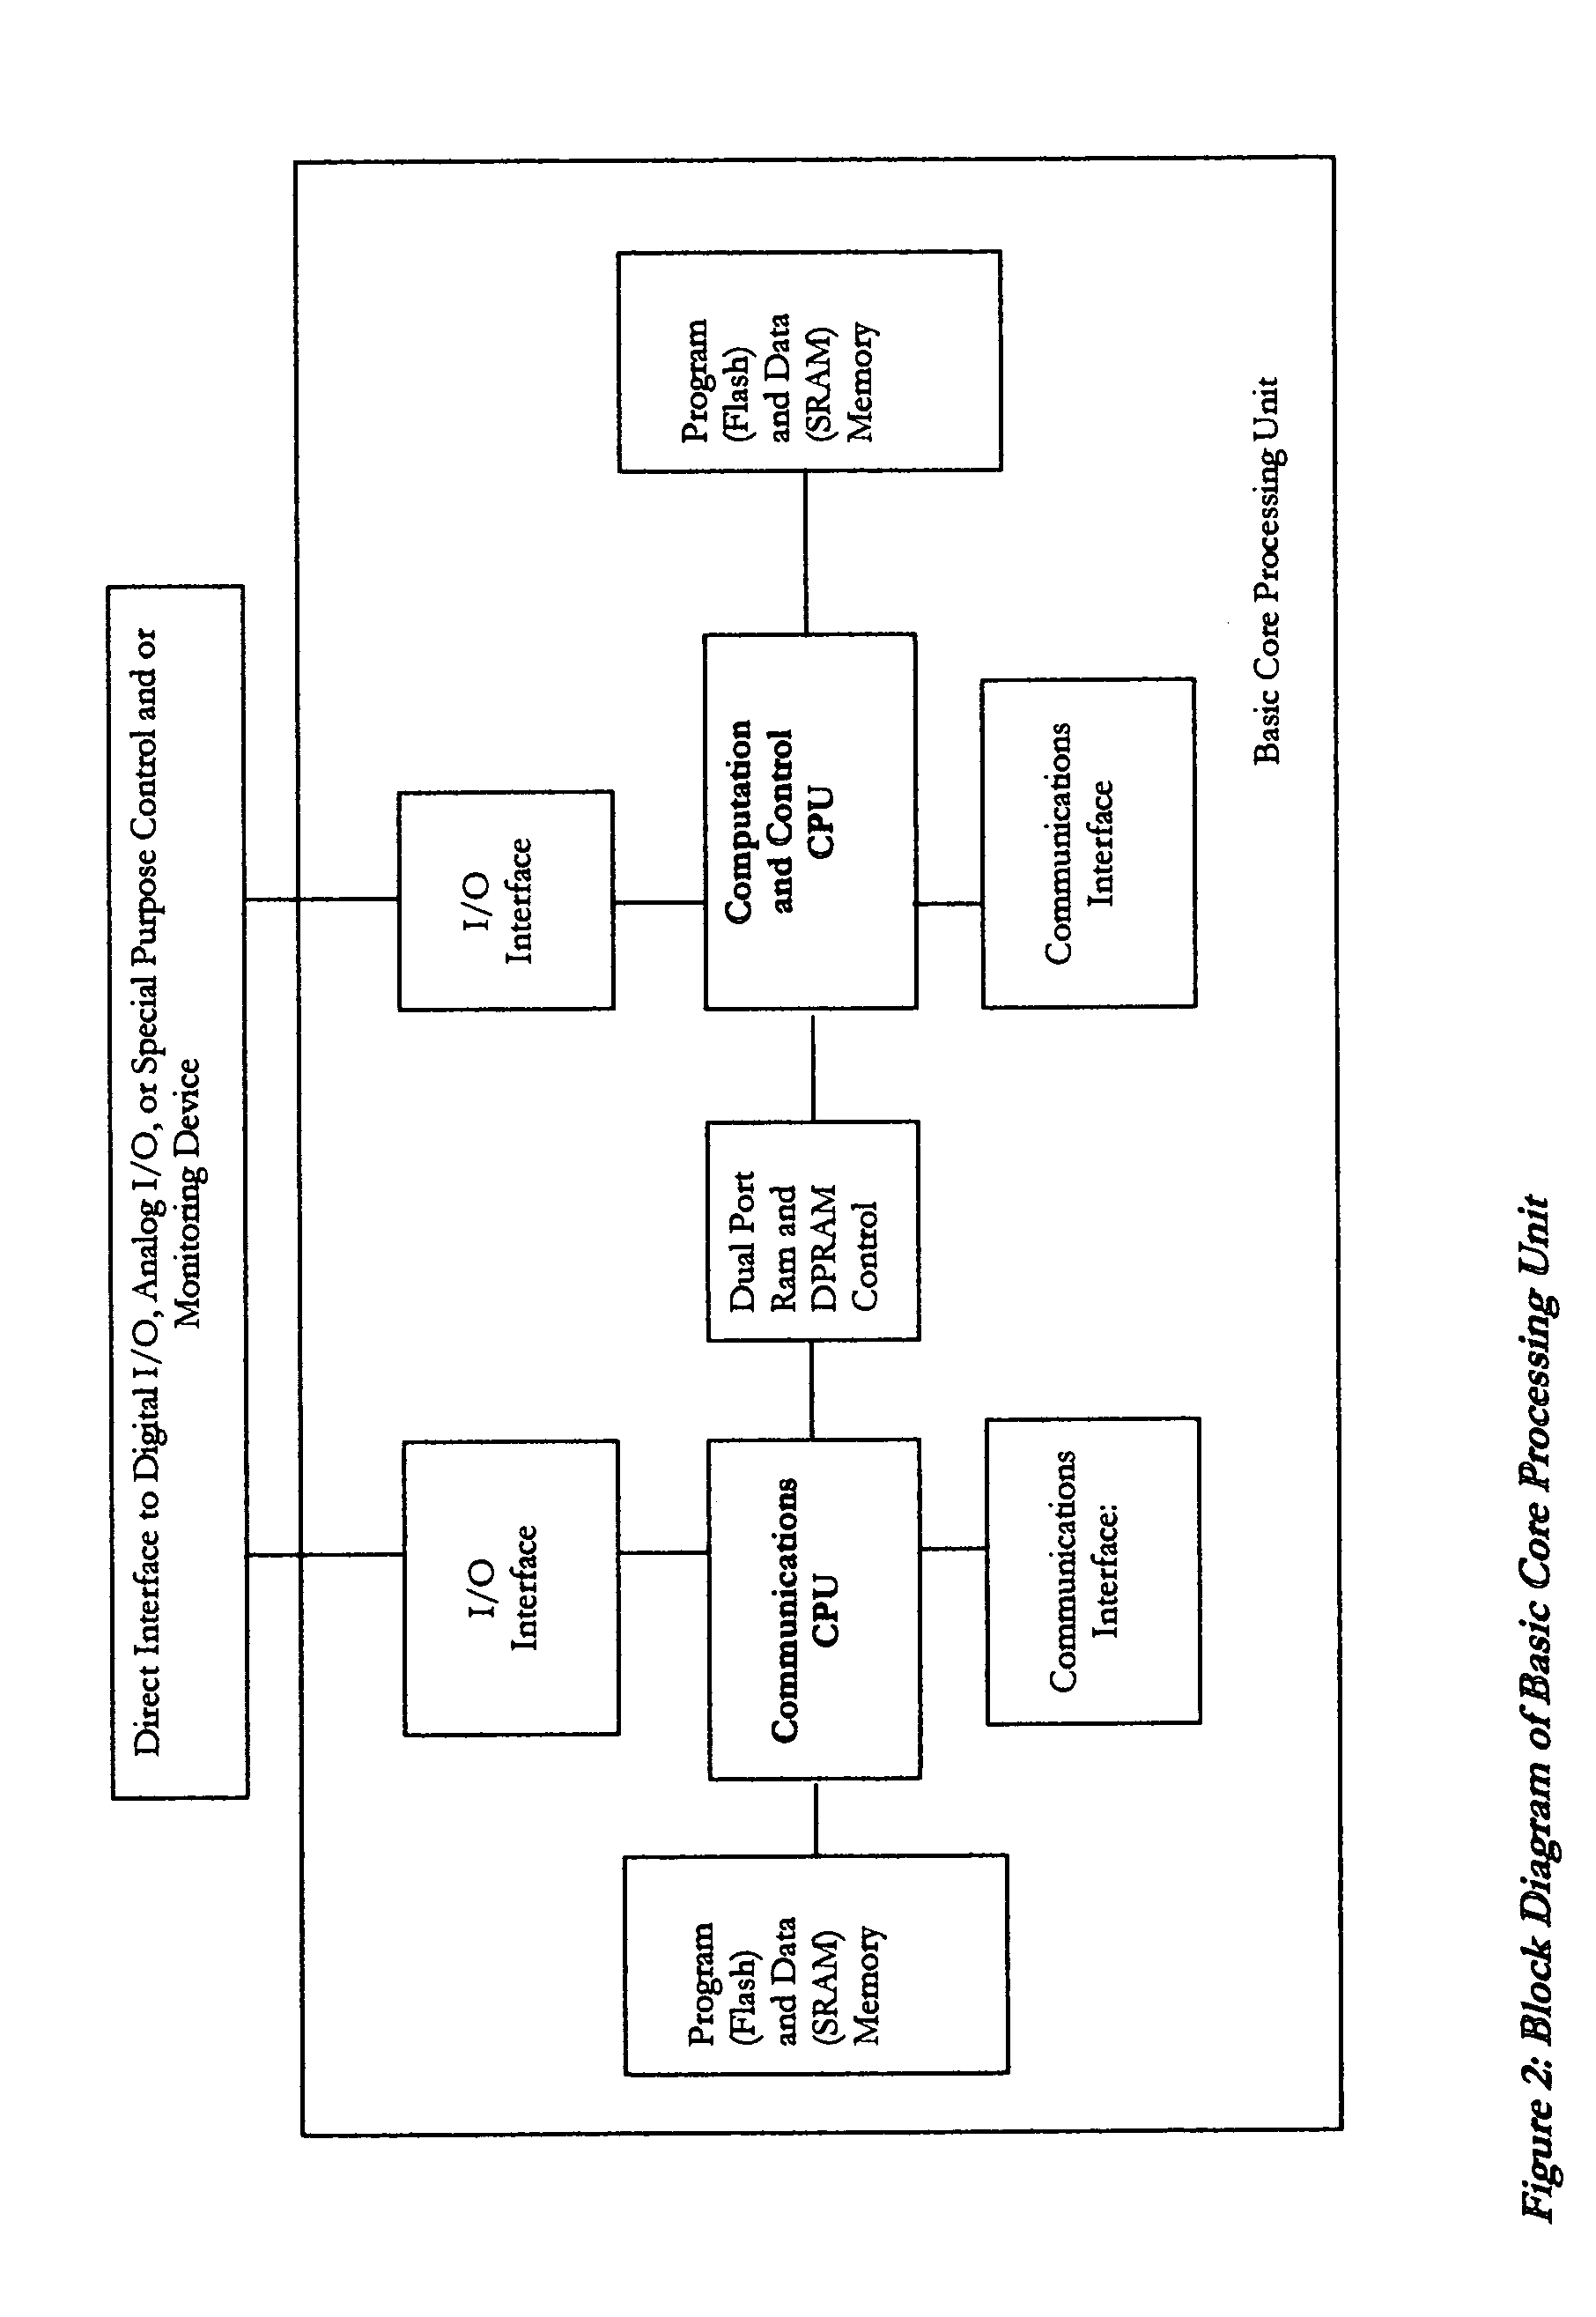 Deterministic real time hierarchical distributed computing system